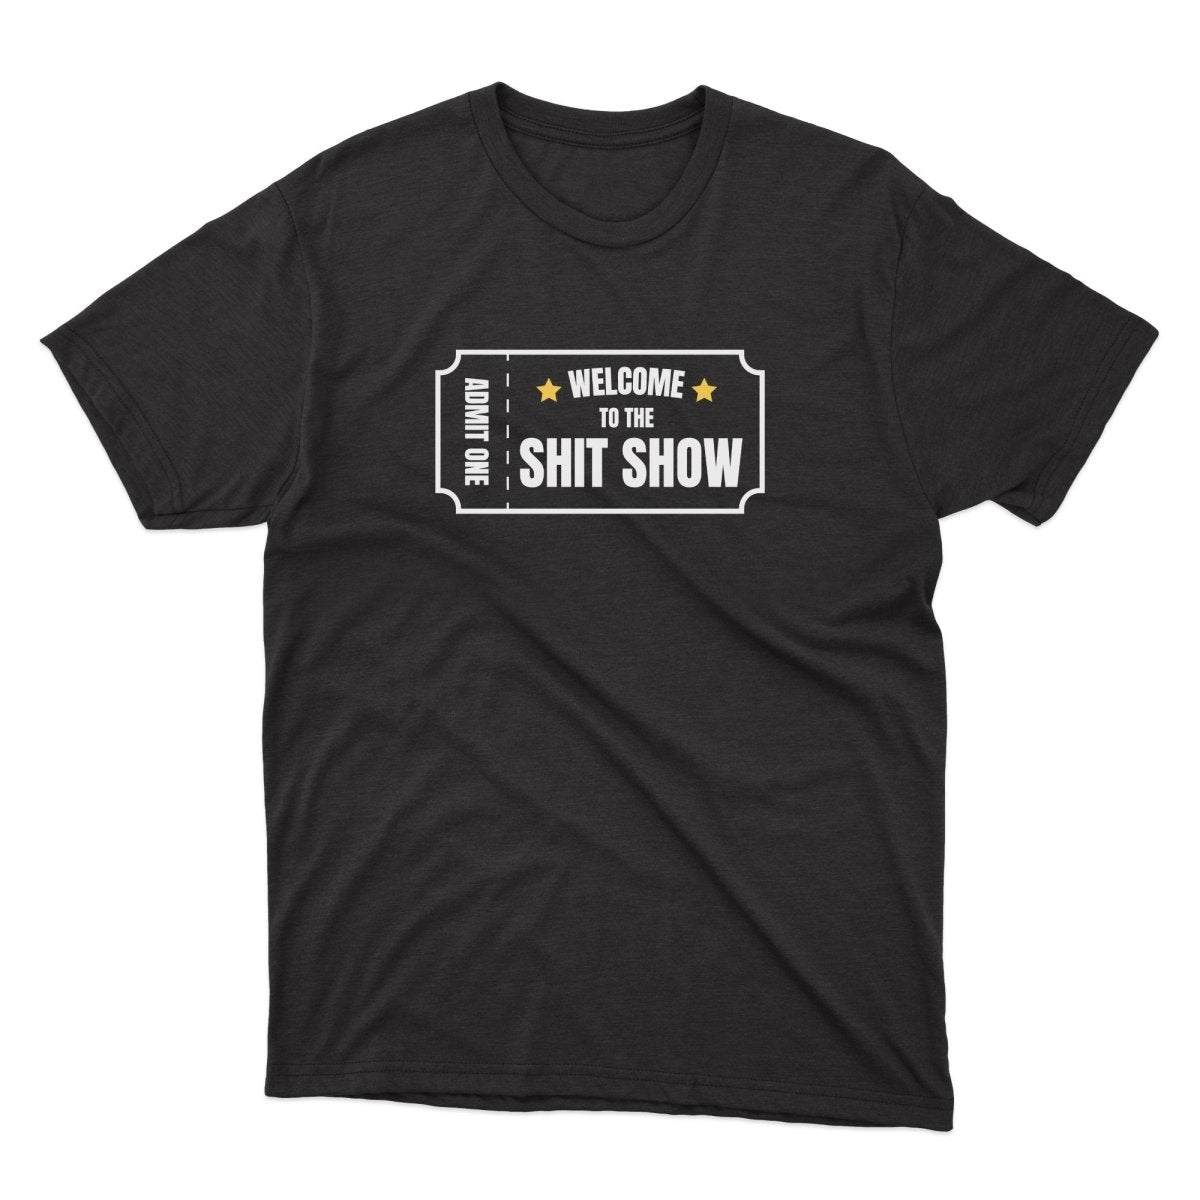 Ticket To The Shit Show Vintage Shirt - stickerbullTicket To The Shit Show Vintage ShirtShirtsPrintifystickerbull33311435742361893033BlackSa black t - shirt that says welcome to the shit show